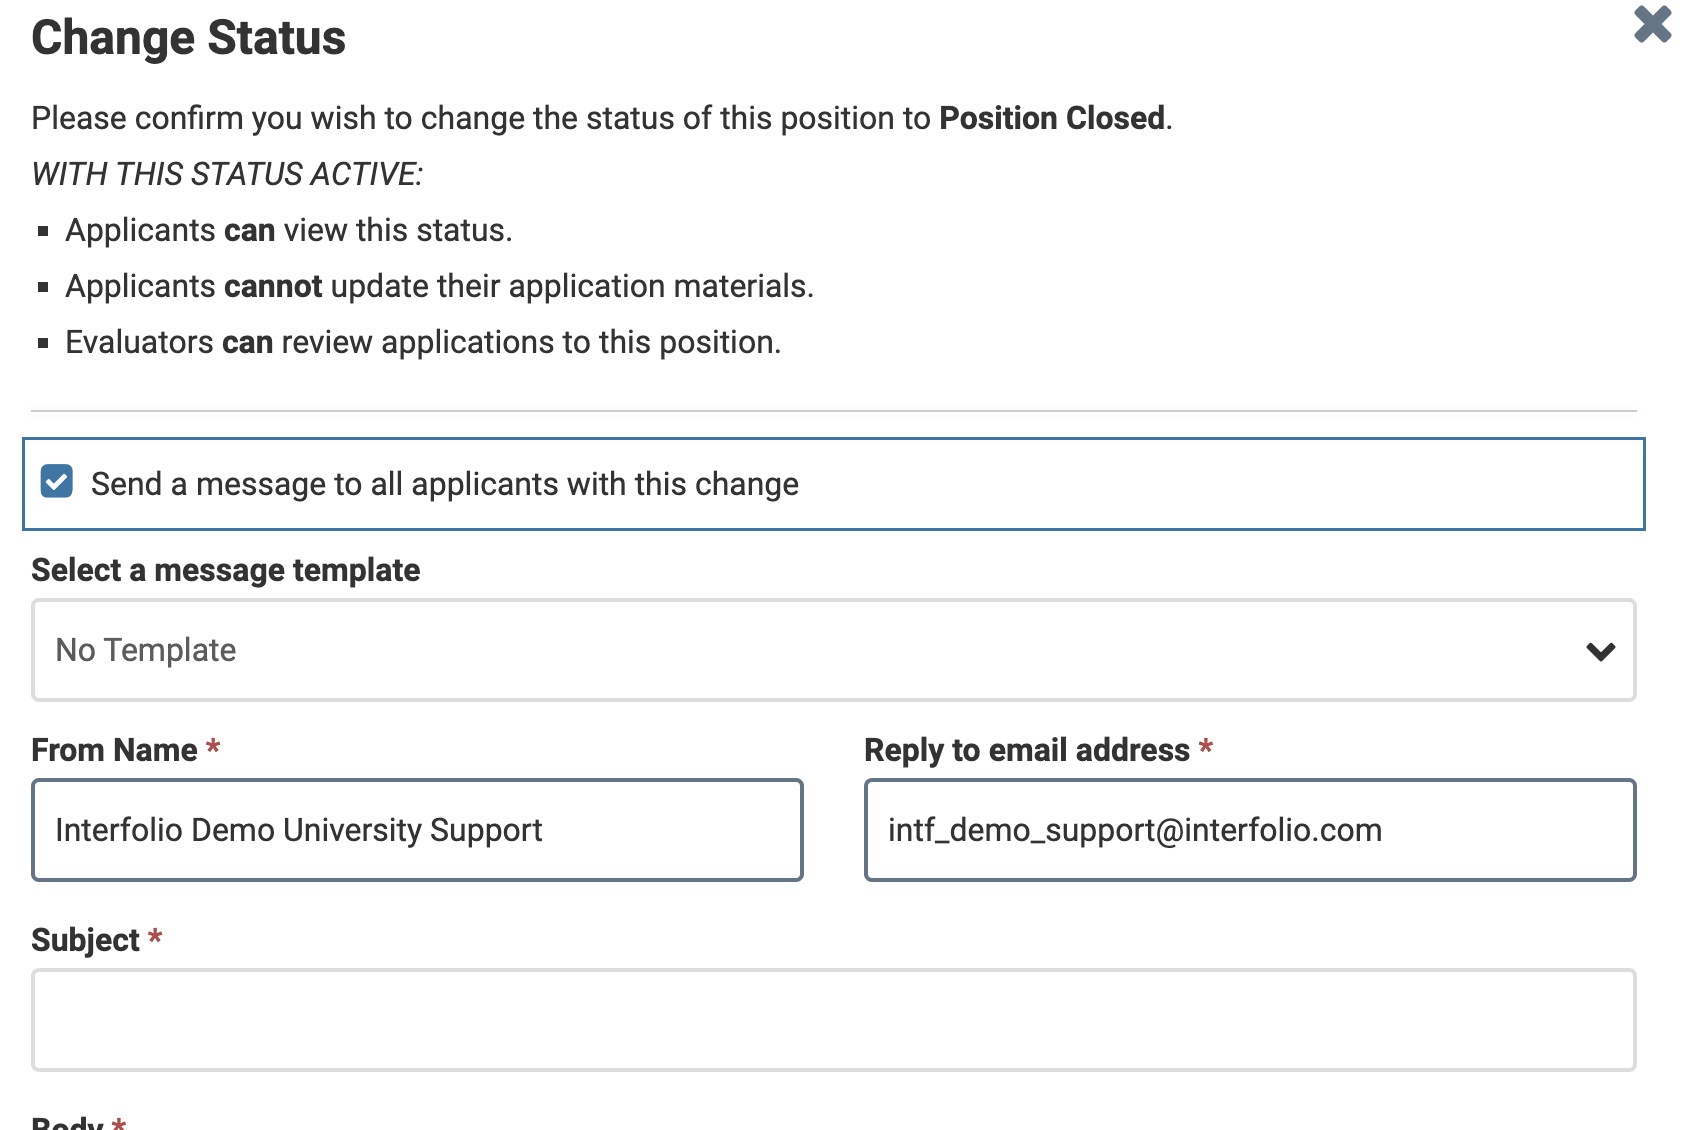 Change Status section with Send a message to all applicants with this change selected and message template dropdown below